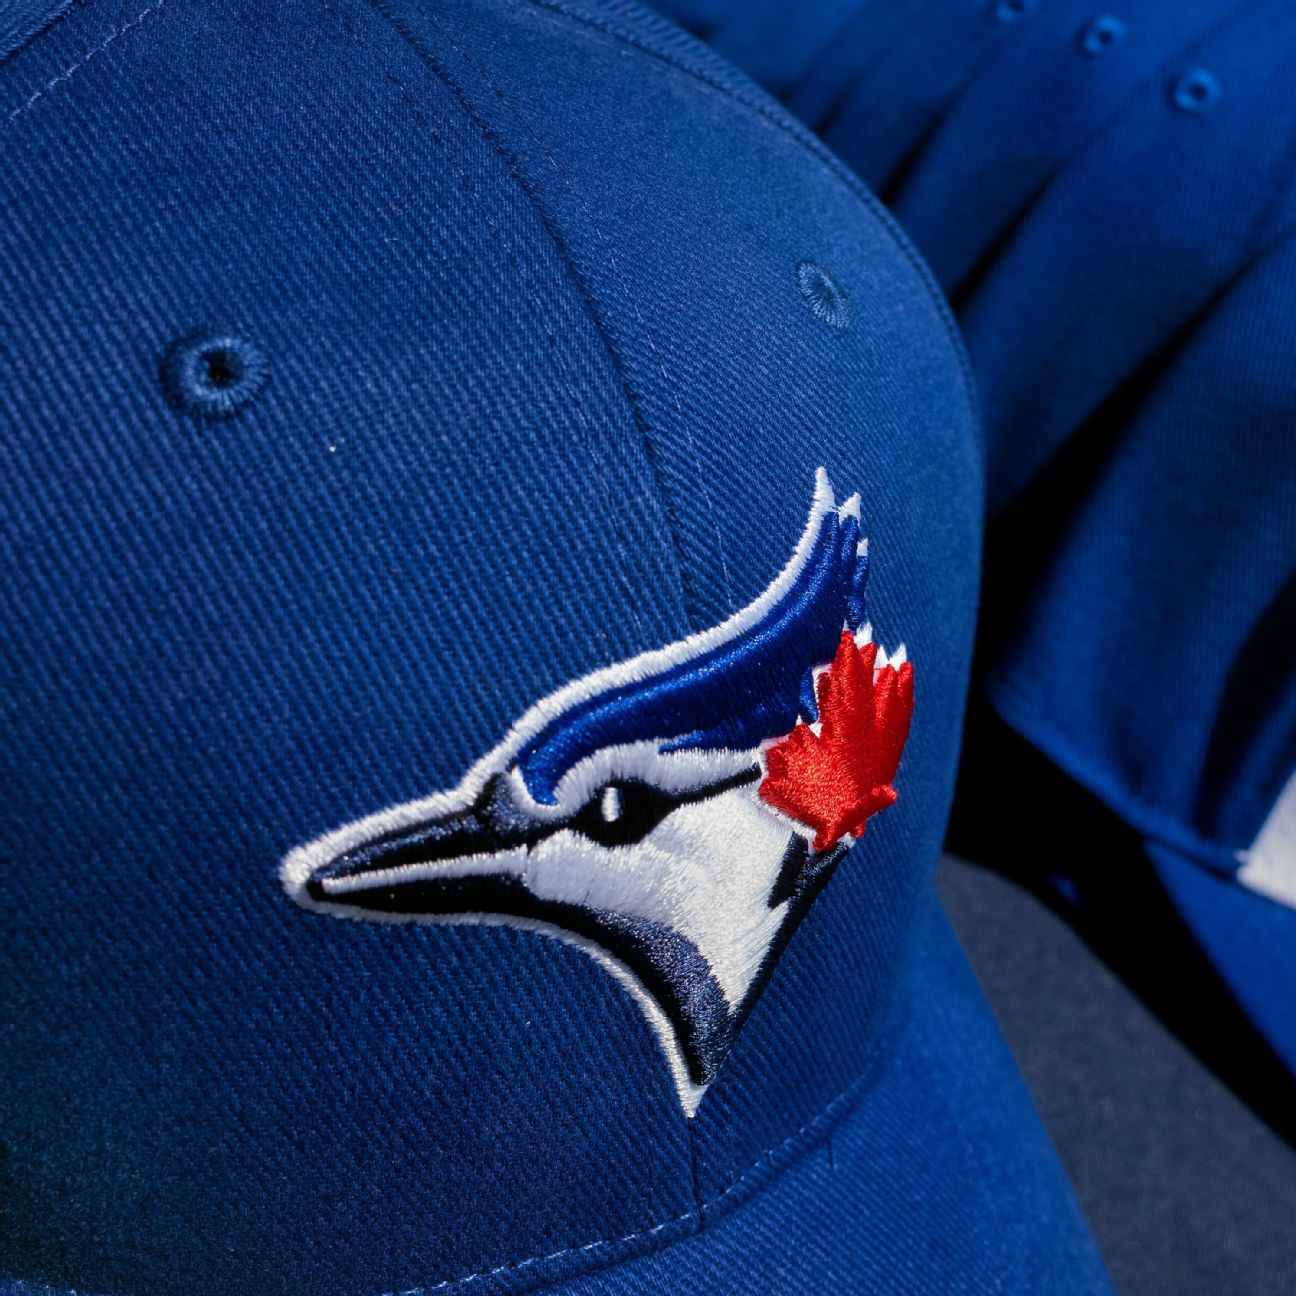 Things To Expect When You Go See A Toronto Blue Jays Game - Narcity